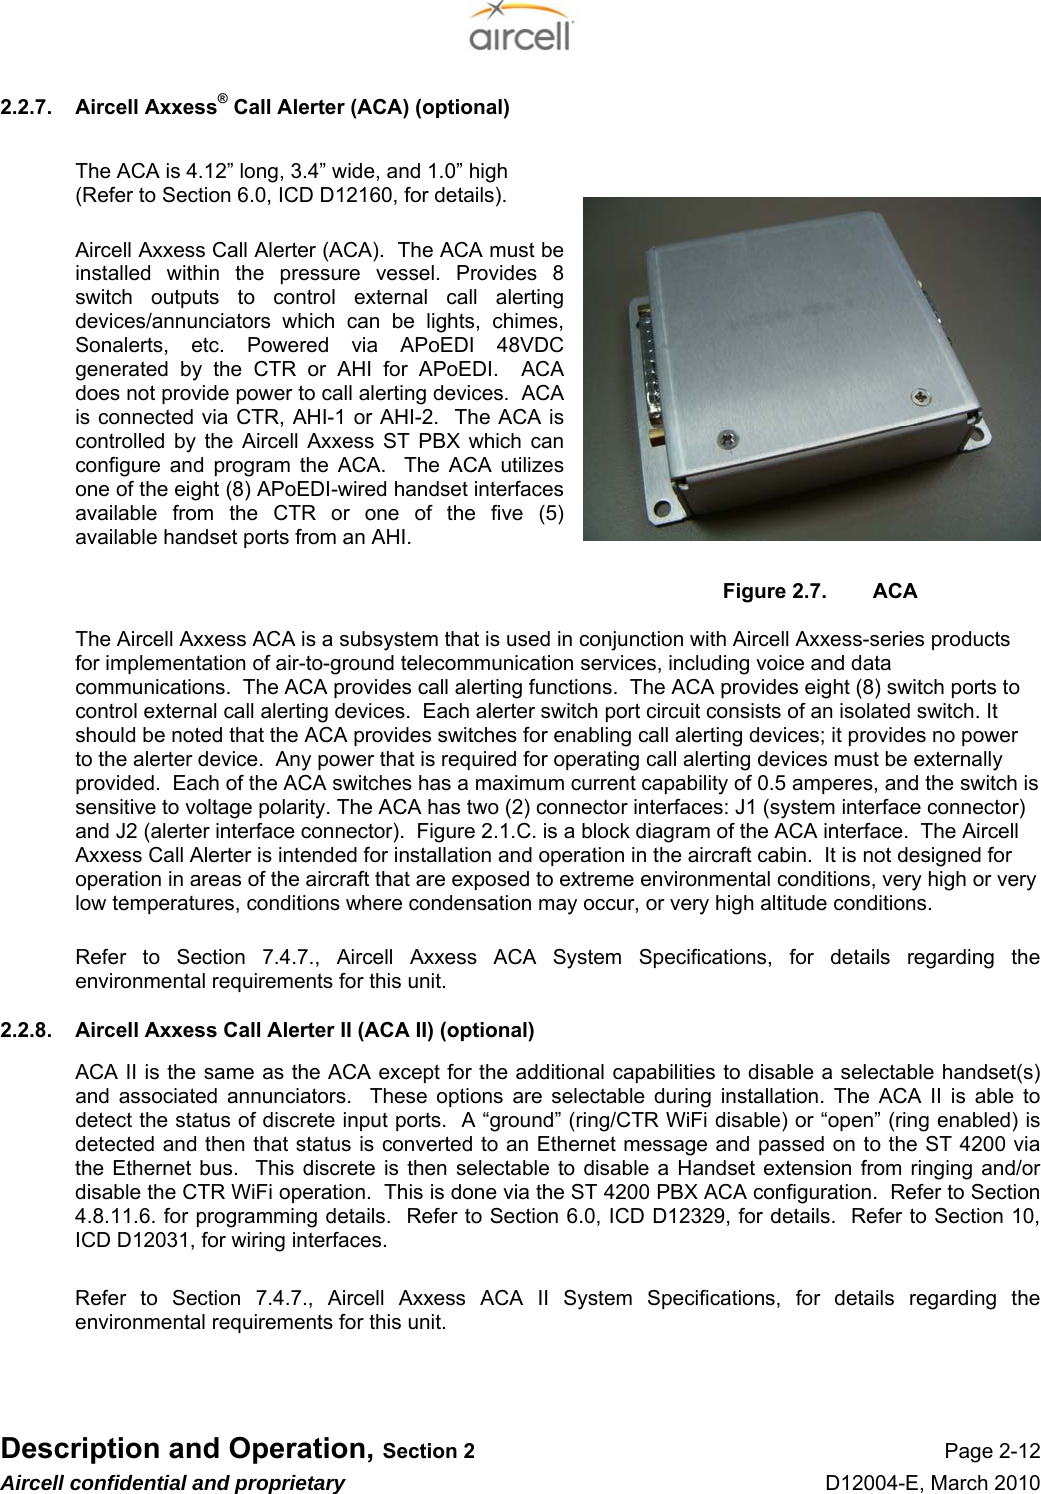  Description and Operation, Section 2 Page 2-12 Aircell confidential and proprietary D12004-E, March 2010 2.2.7.  Aircell Axxess® Call Alerter (ACA) (optional)  The ACA is 4.12” long, 3.4” wide, and 1.0” high (Refer to Section 6.0, ICD D12160, for details).  Aircell Axxess Call Alerter (ACA).  The ACA must be installed within the pressure vessel. Provides 8 switch outputs to control external call alerting devices/annunciators which can be lights, chimes, Sonalerts, etc. Powered via APoEDI 48VDC generated by the CTR or AHI for APoEDI.  ACA does not provide power to call alerting devices.  ACA is connected via CTR, AHI-1 or AHI-2.  The ACA is controlled by the Aircell Axxess ST PBX which can configure and program the ACA.  The ACA utilizes one of the eight (8) APoEDI-wired handset interfaces available from the CTR or one of the five (5) available handset ports from an AHI.  Figure 2.7.  ACA  The Aircell Axxess ACA is a subsystem that is used in conjunction with Aircell Axxess-series products for implementation of air-to-ground telecommunication services, including voice and data communications.  The ACA provides call alerting functions.  The ACA provides eight (8) switch ports to control external call alerting devices.  Each alerter switch port circuit consists of an isolated switch. It should be noted that the ACA provides switches for enabling call alerting devices; it provides no power to the alerter device.  Any power that is required for operating call alerting devices must be externally provided.  Each of the ACA switches has a maximum current capability of 0.5 amperes, and the switch is sensitive to voltage polarity. The ACA has two (2) connector interfaces: J1 (system interface connector) and J2 (alerter interface connector).  Figure 2.1.C. is a block diagram of the ACA interface.  The Aircell Axxess Call Alerter is intended for installation and operation in the aircraft cabin.  It is not designed for operation in areas of the aircraft that are exposed to extreme environmental conditions, very high or very low temperatures, conditions where condensation may occur, or very high altitude conditions.  Refer to Section 7.4.7., Aircell Axxess ACA System Specifications, for details regarding the environmental requirements for this unit. 2.2.8.  Aircell Axxess Call Alerter II (ACA II) (optional) ACA II is the same as the ACA except for the additional capabilities to disable a selectable handset(s) and associated annunciators.  These options are selectable during installation. The ACA II is able to detect the status of discrete input ports.  A “ground” (ring/CTR WiFi disable) or “open” (ring enabled) is detected and then that status is converted to an Ethernet message and passed on to the ST 4200 via the Ethernet bus.  This discrete is then selectable to disable a Handset extension from ringing and/or disable the CTR WiFi operation.  This is done via the ST 4200 PBX ACA configuration.  Refer to Section 4.8.11.6. for programming details.  Refer to Section 6.0, ICD D12329, for details.  Refer to Section 10, ICD D12031, for wiring interfaces.  Refer to Section 7.4.7., Aircell Axxess ACA II System Specifications, for details regarding the environmental requirements for this unit.    